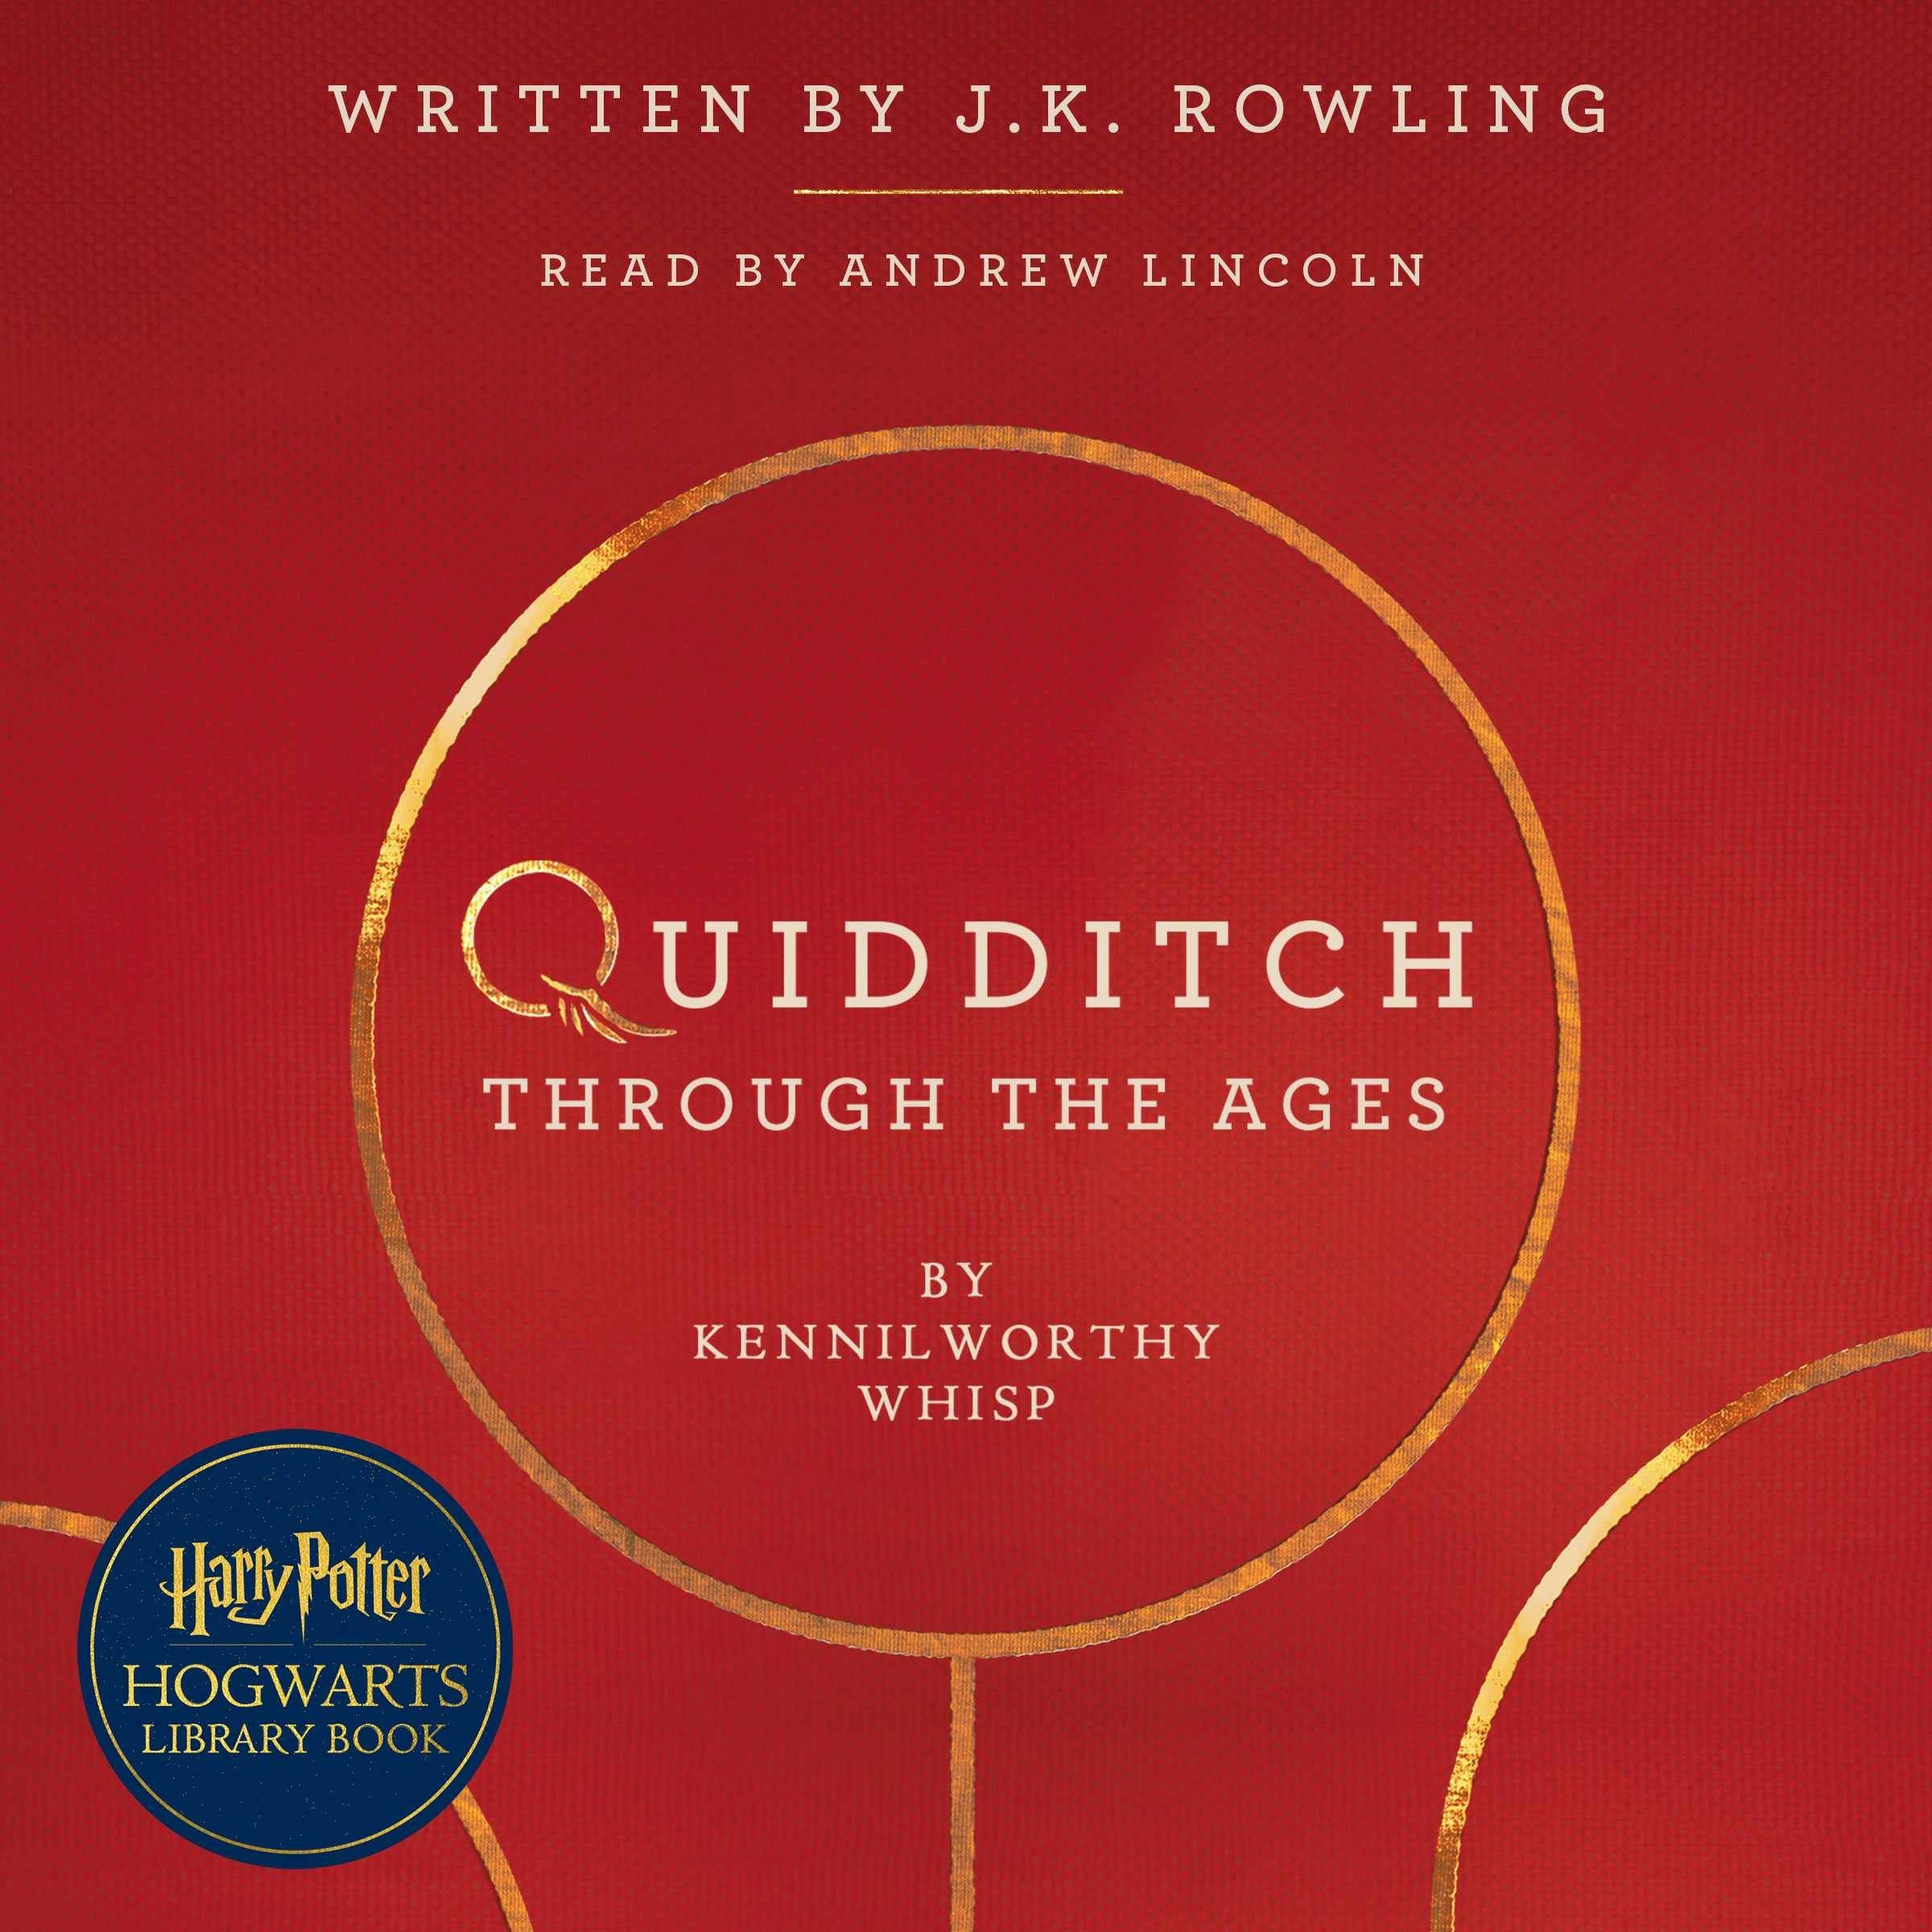 Quidditch Through the Ages: A Harry Potter Hogwarts Library Book - Kennilworthy Whisp, J.K. Rowling